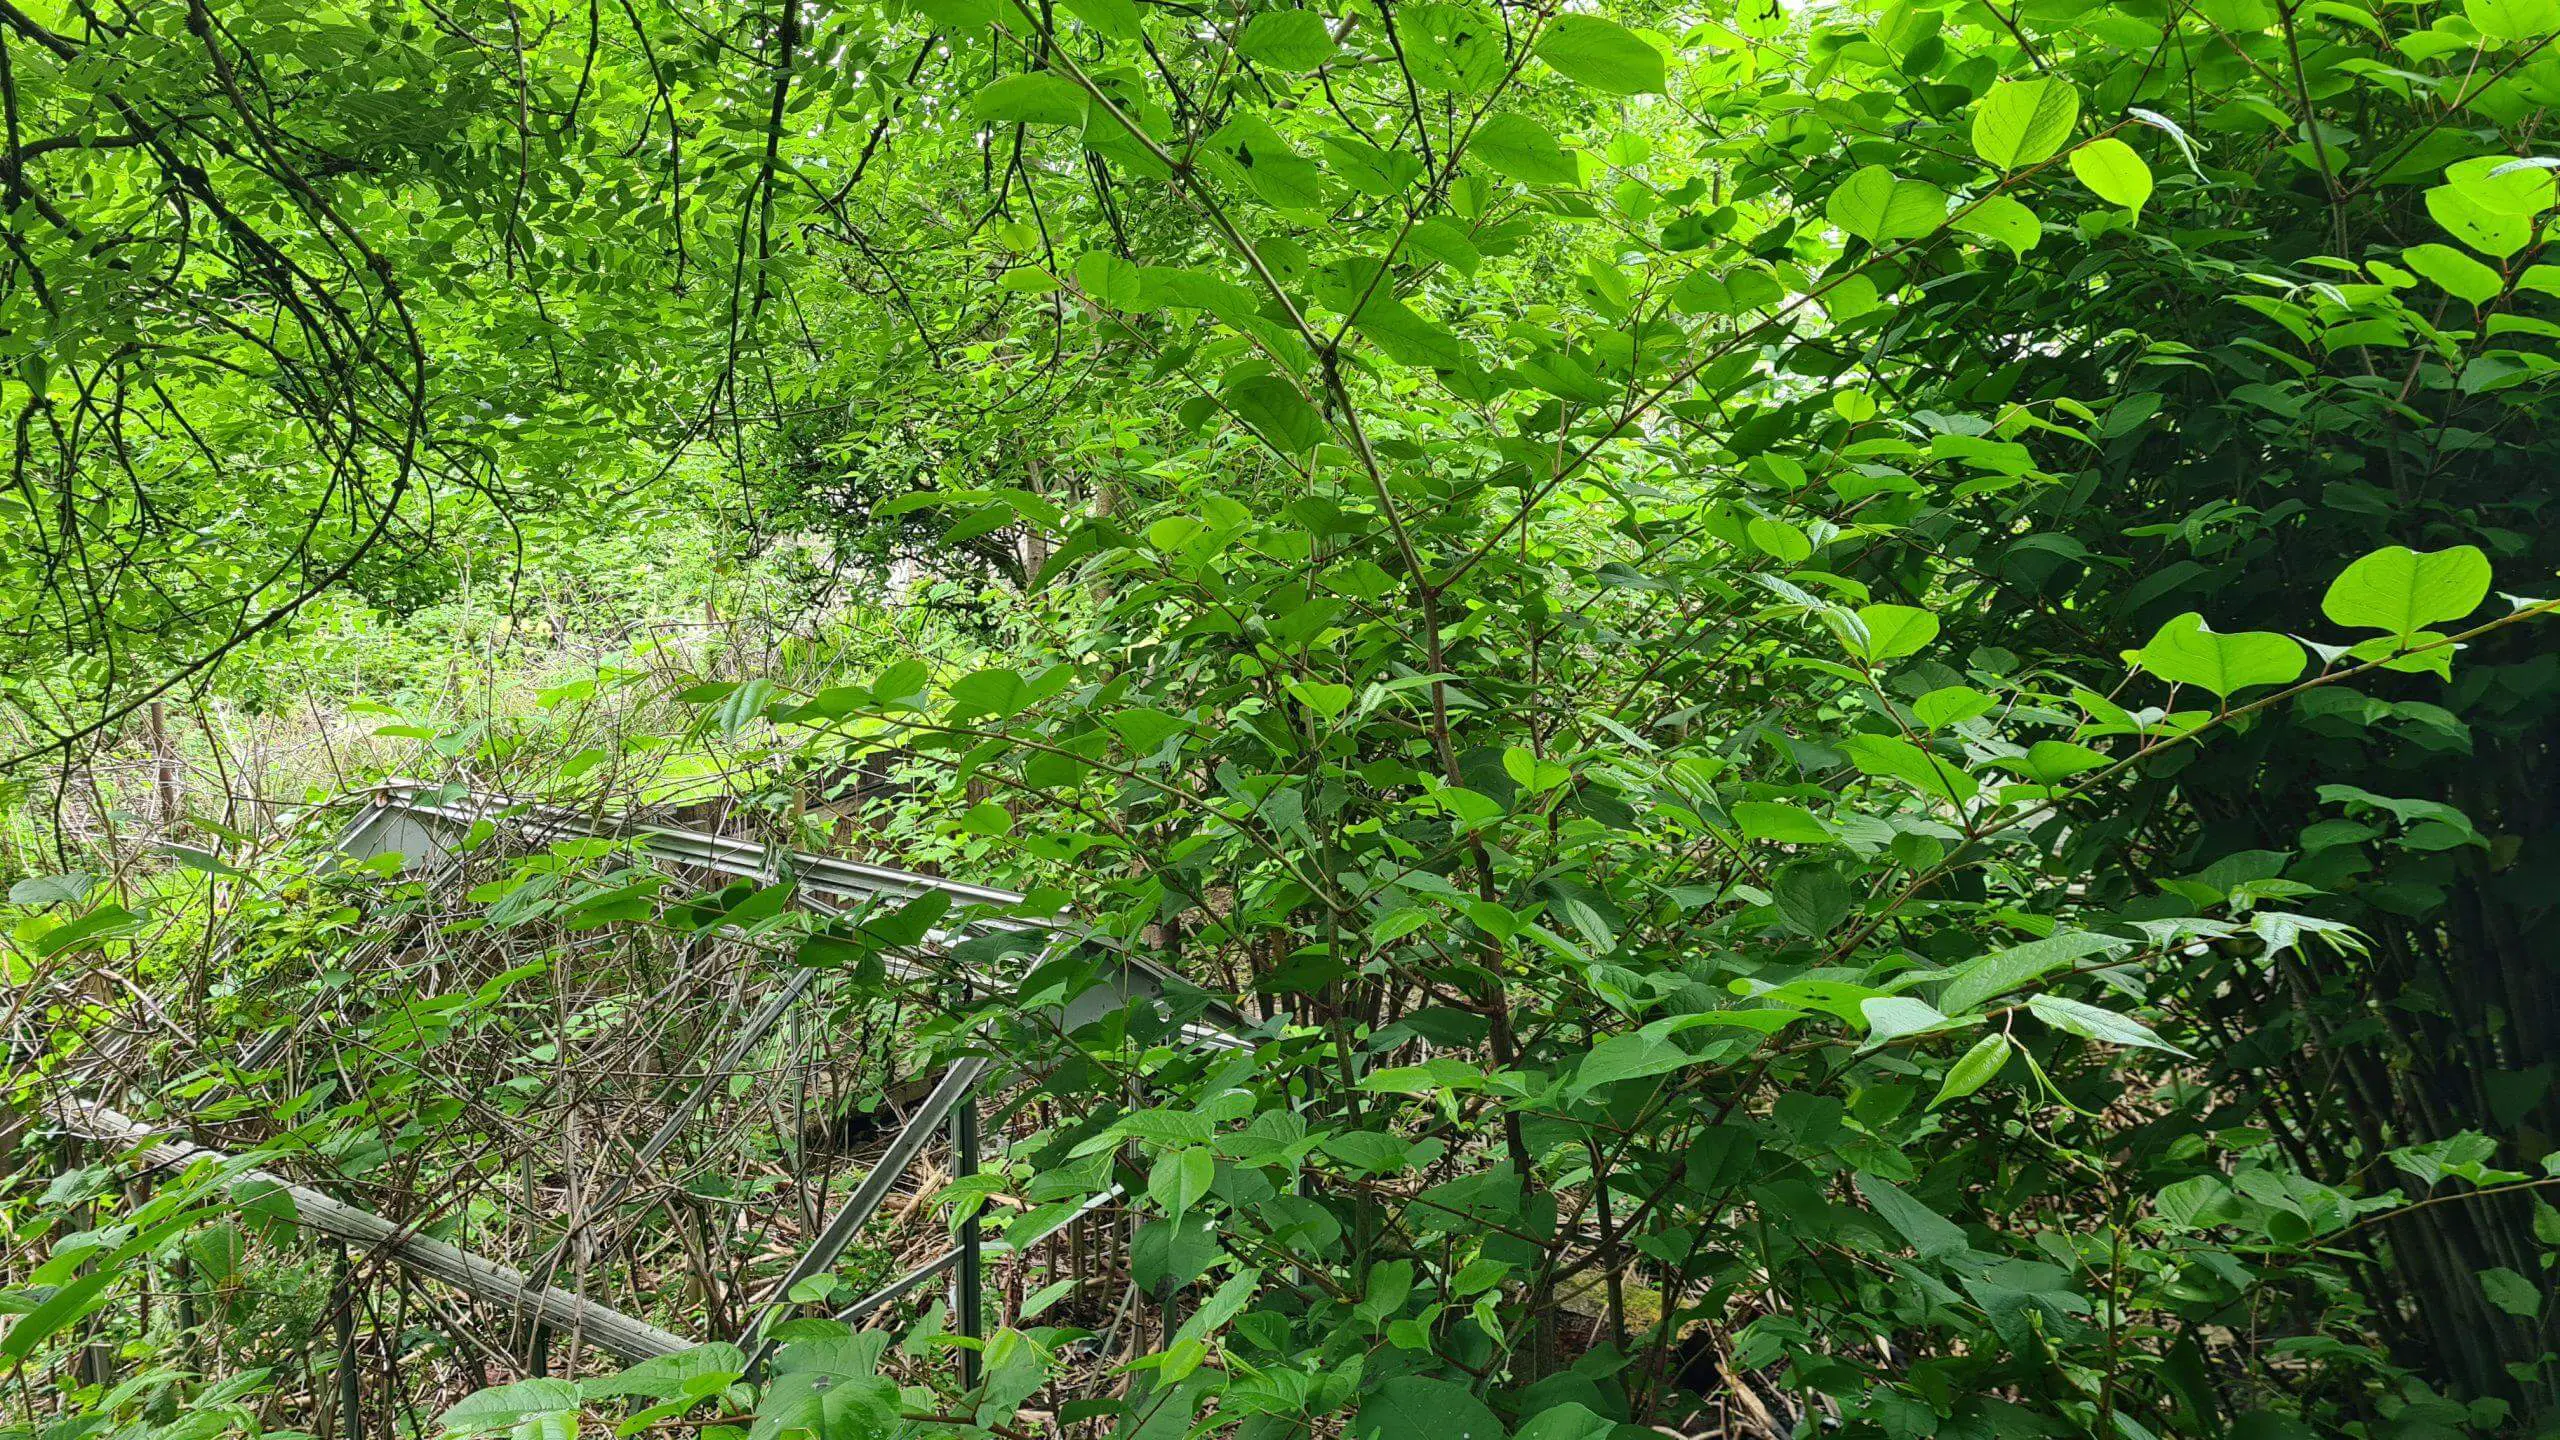 Japanese knotweed growing aggressively and robbing native plants of light water and nutrients within the soil